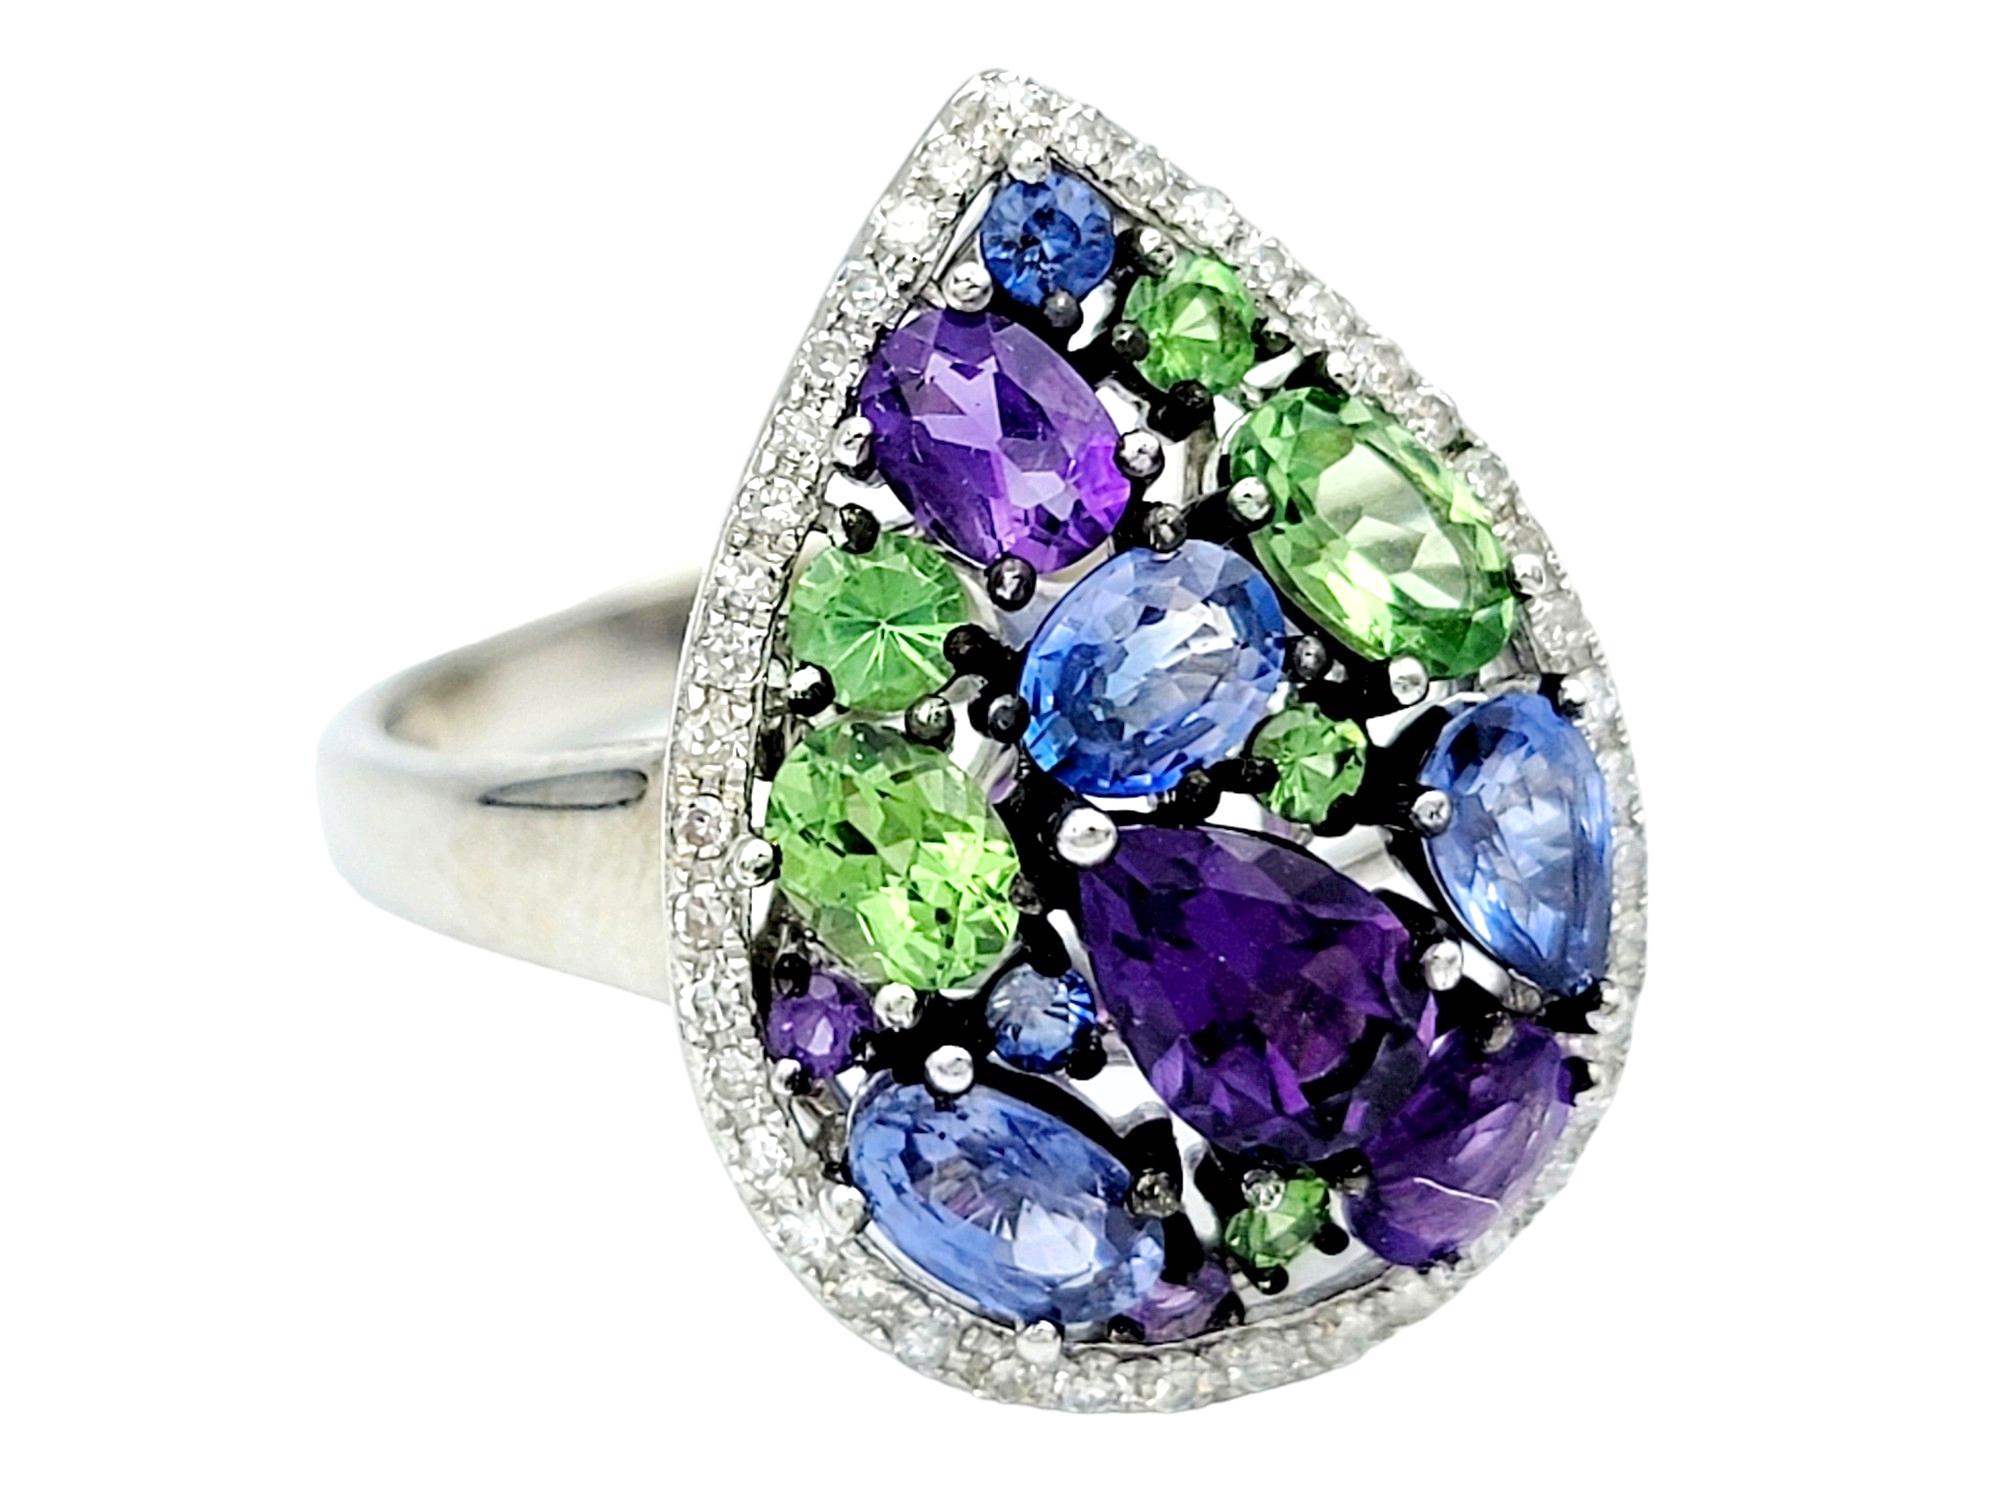 Ring Size: 8.25

The Effy Watercolors pear-shaped cluster ring in 14 karat white gold is a stunning testament to artistic flair and colorful elegance. At its center, a vibrant cluster of gemstones, including amethyst, blue sapphire, and tsavorite,